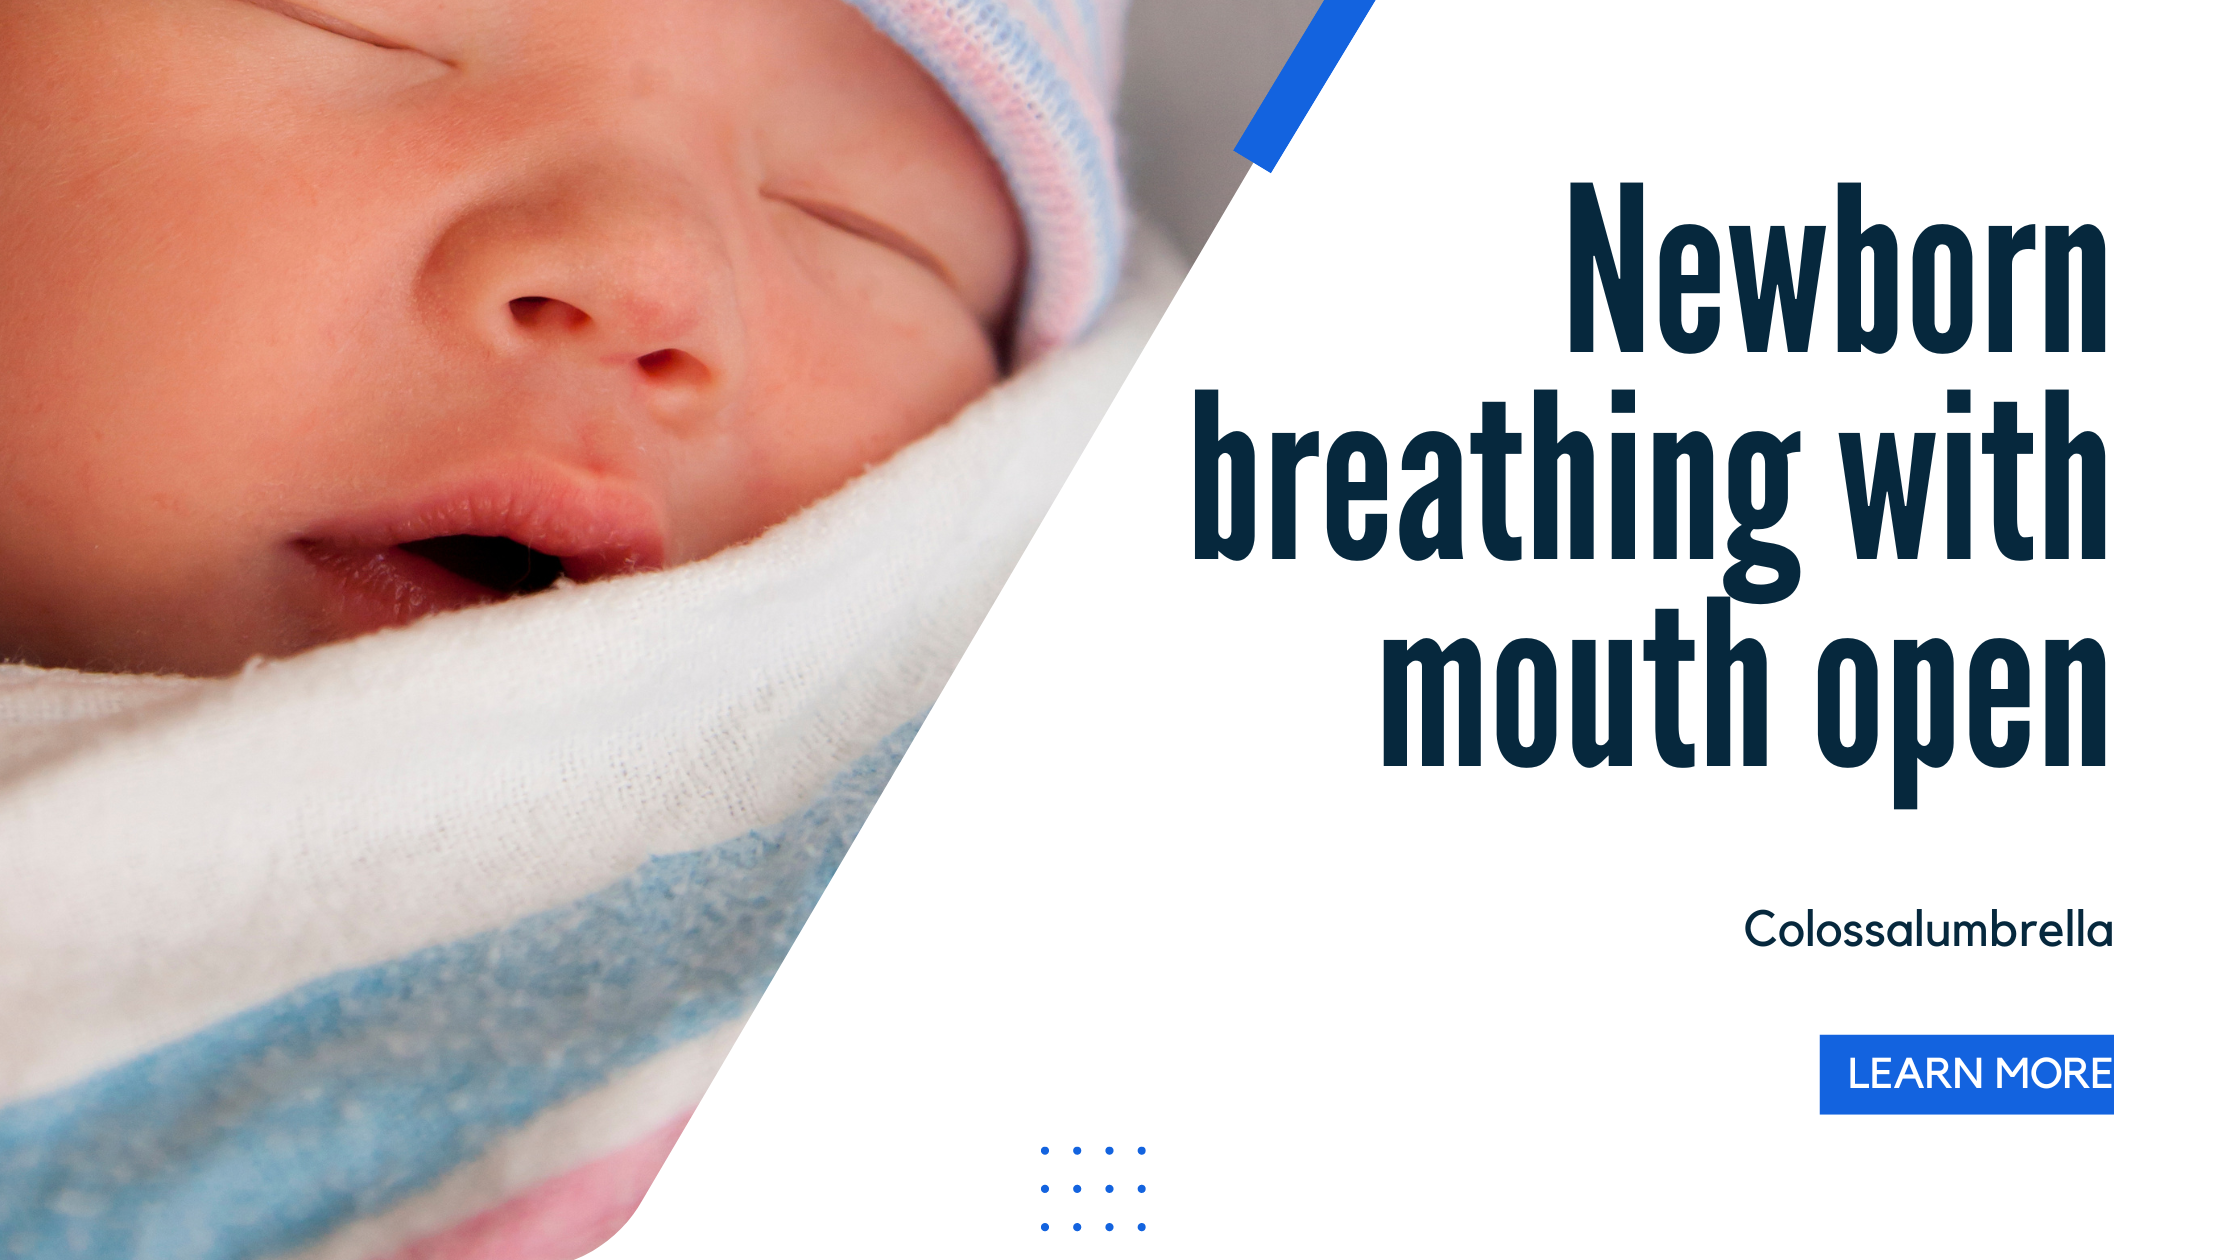 Newborn breathing with mouth open